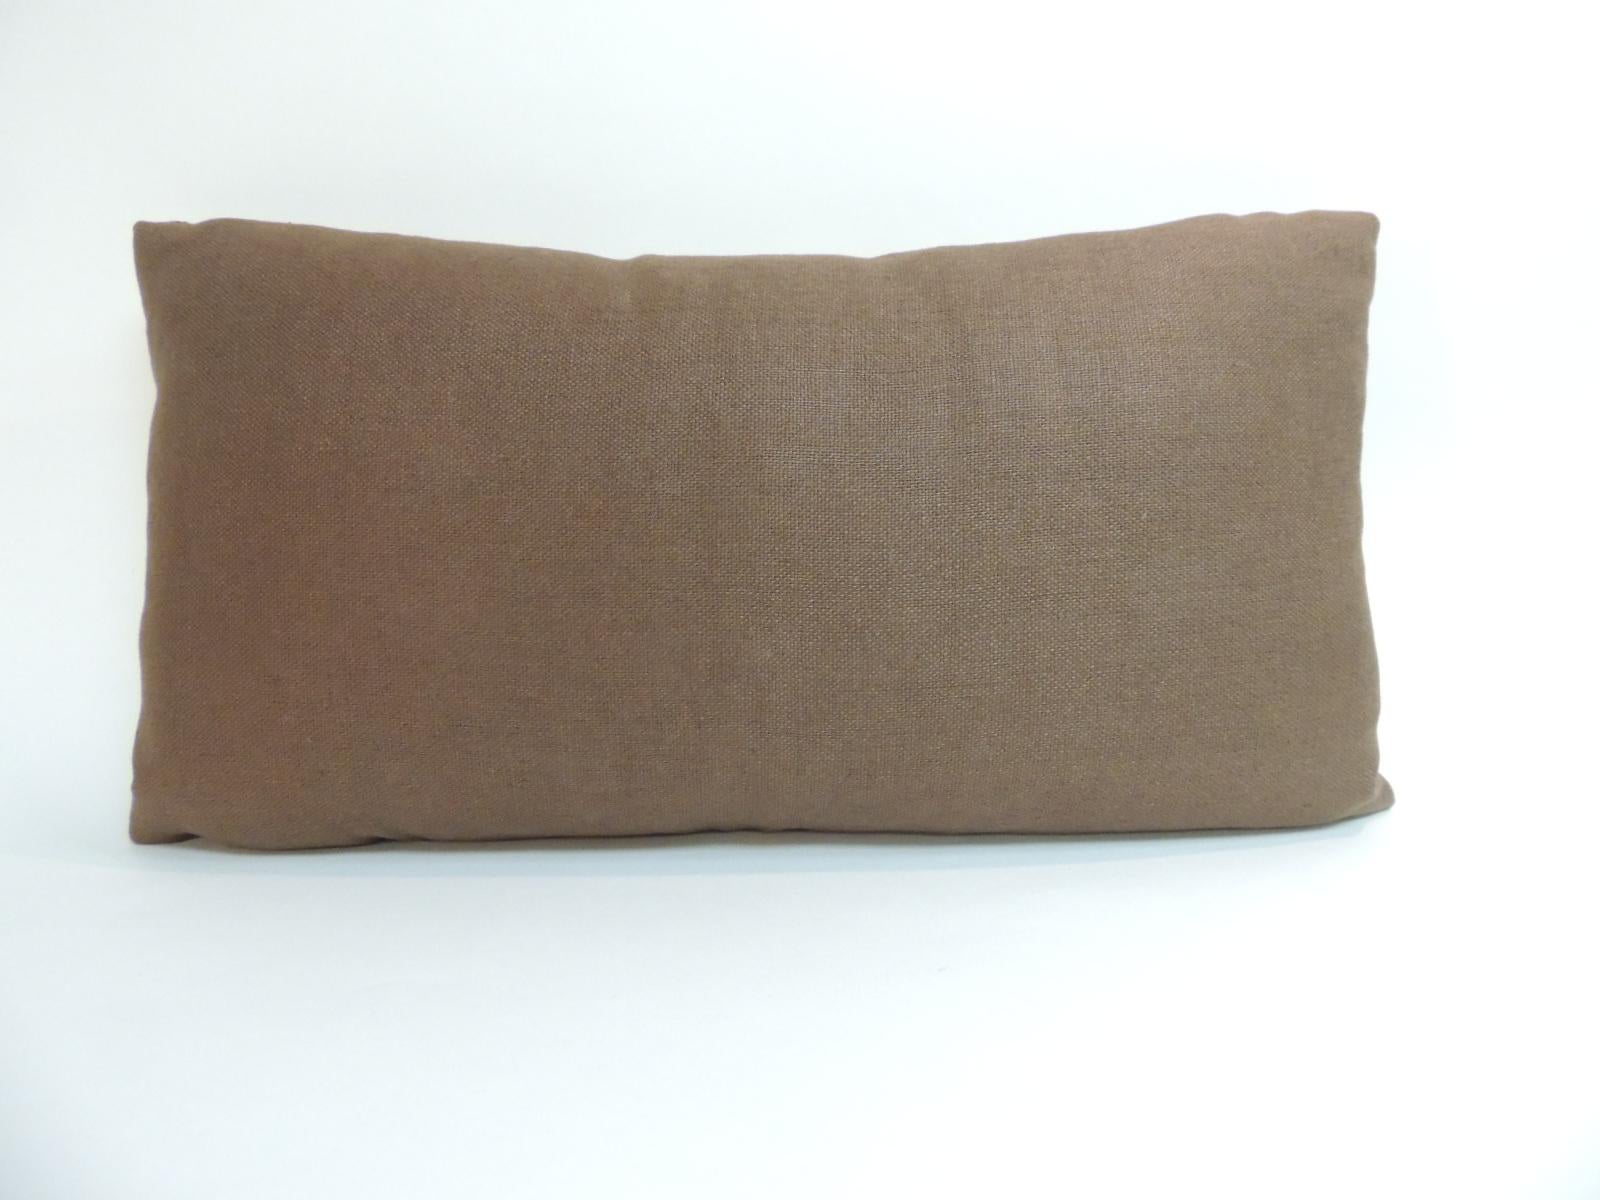 Hand-Crafted Vintage French Graphic Brown Decorative Bolster Pillow